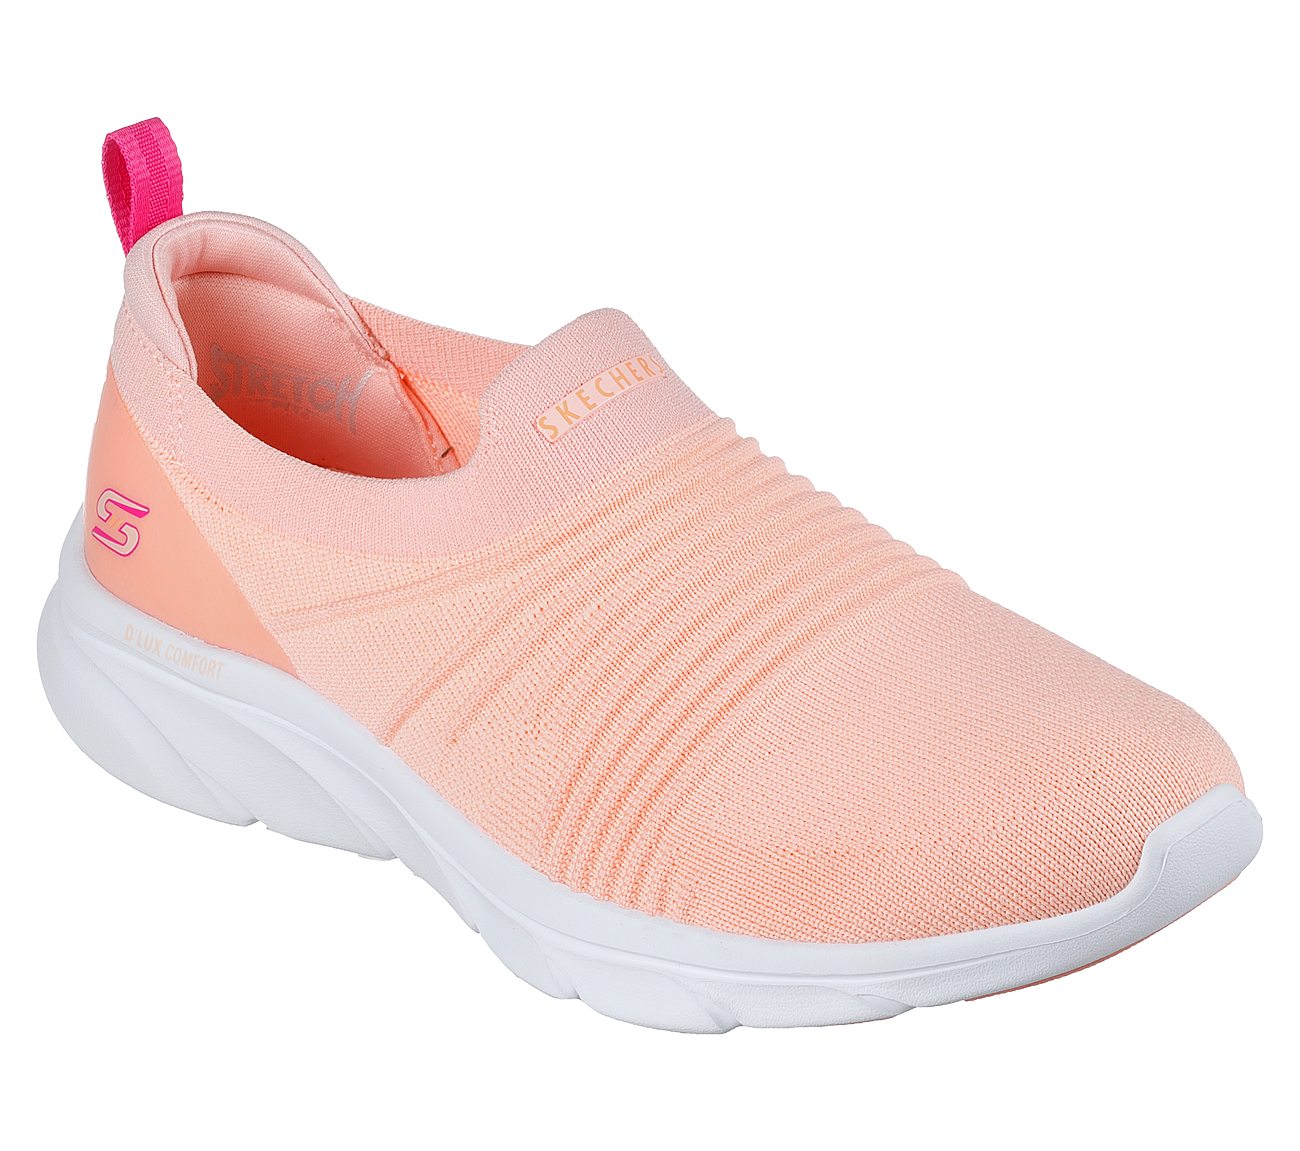 D'LUX COMFORT-GLOW TIME, PEACH Footwear Lateral View